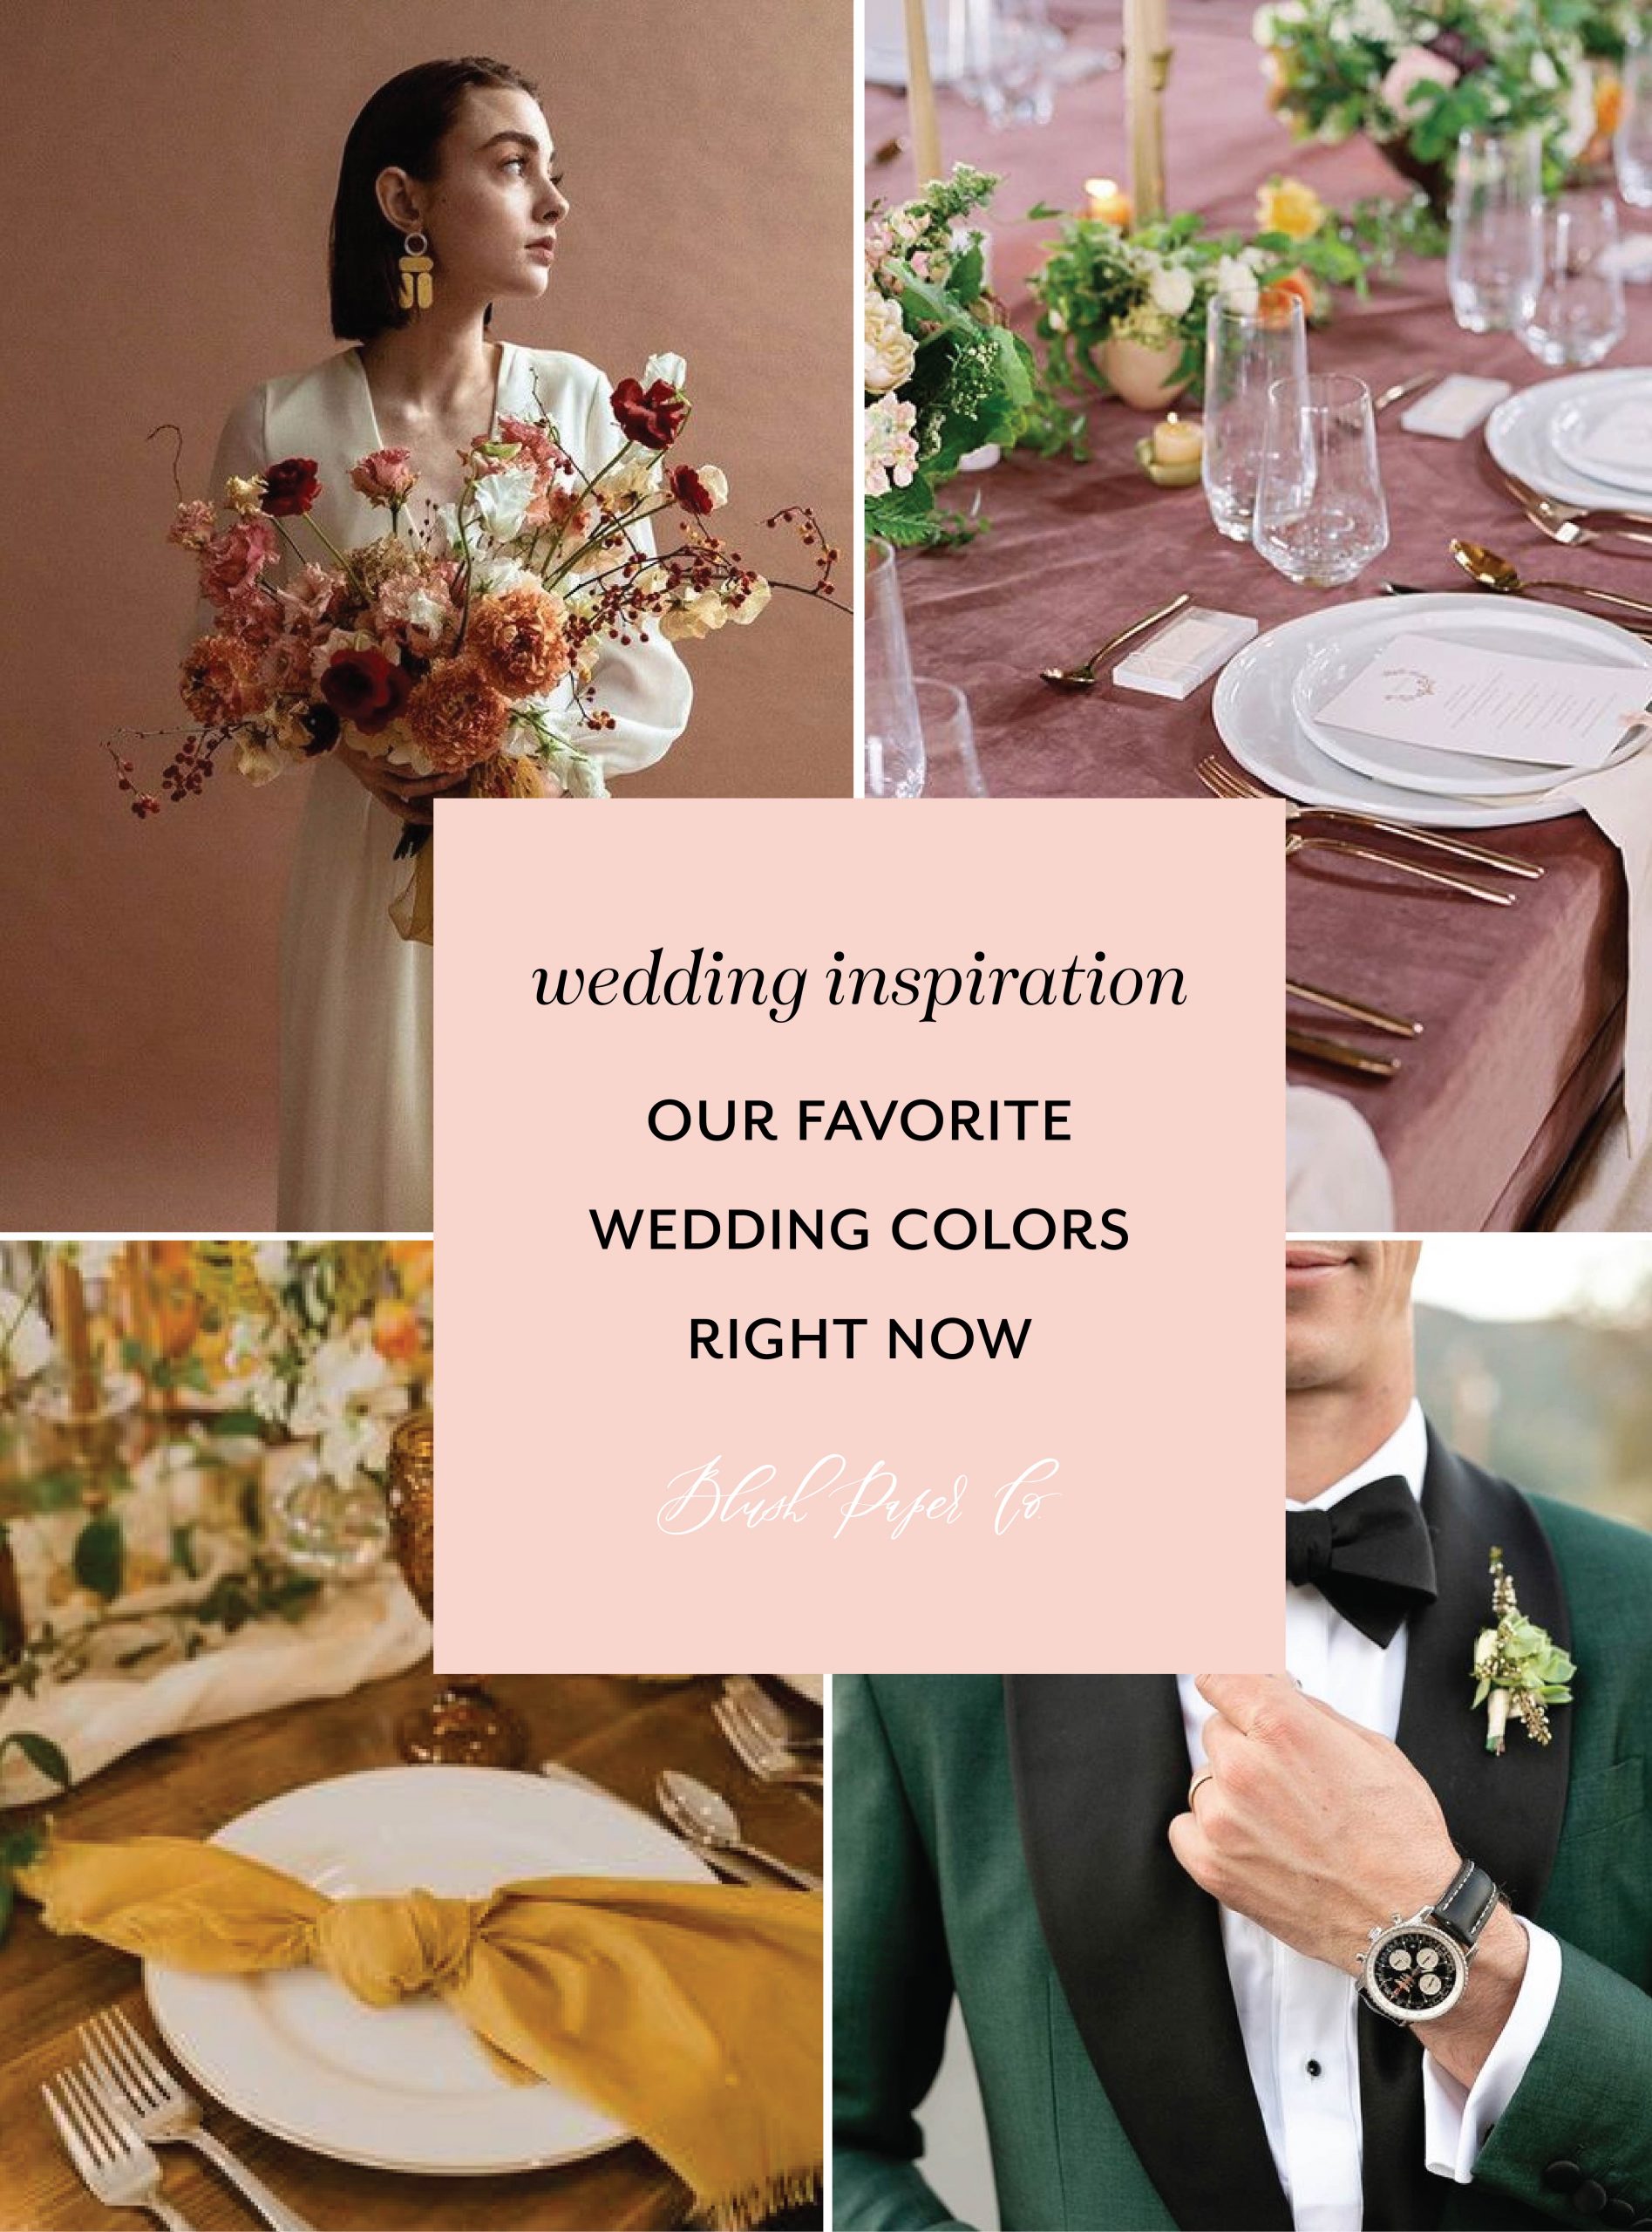 Top Wedding Color Trends for 2020